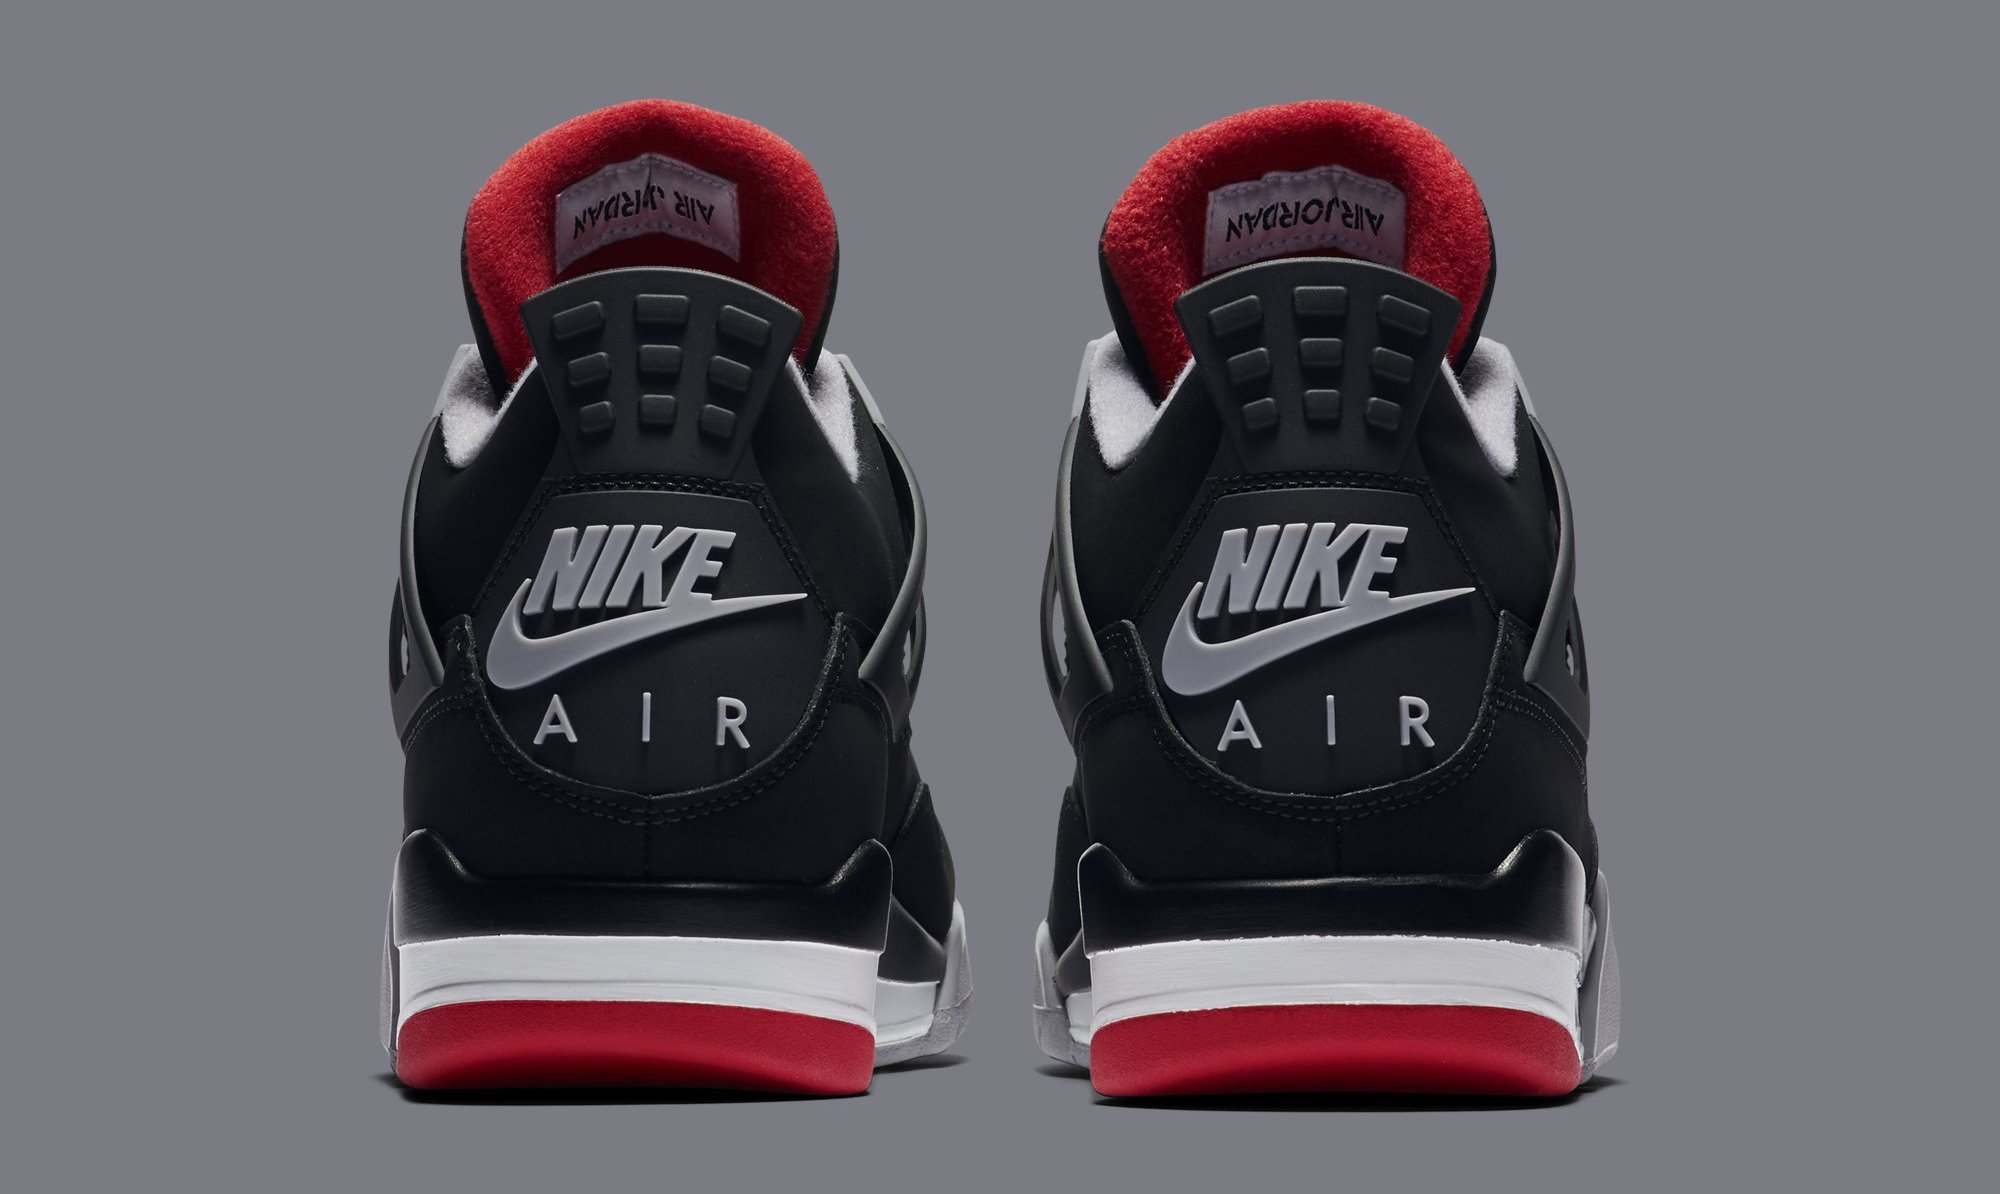 Nike Sb X Air Jordan 4 Expected To Release In 2023 | Complex